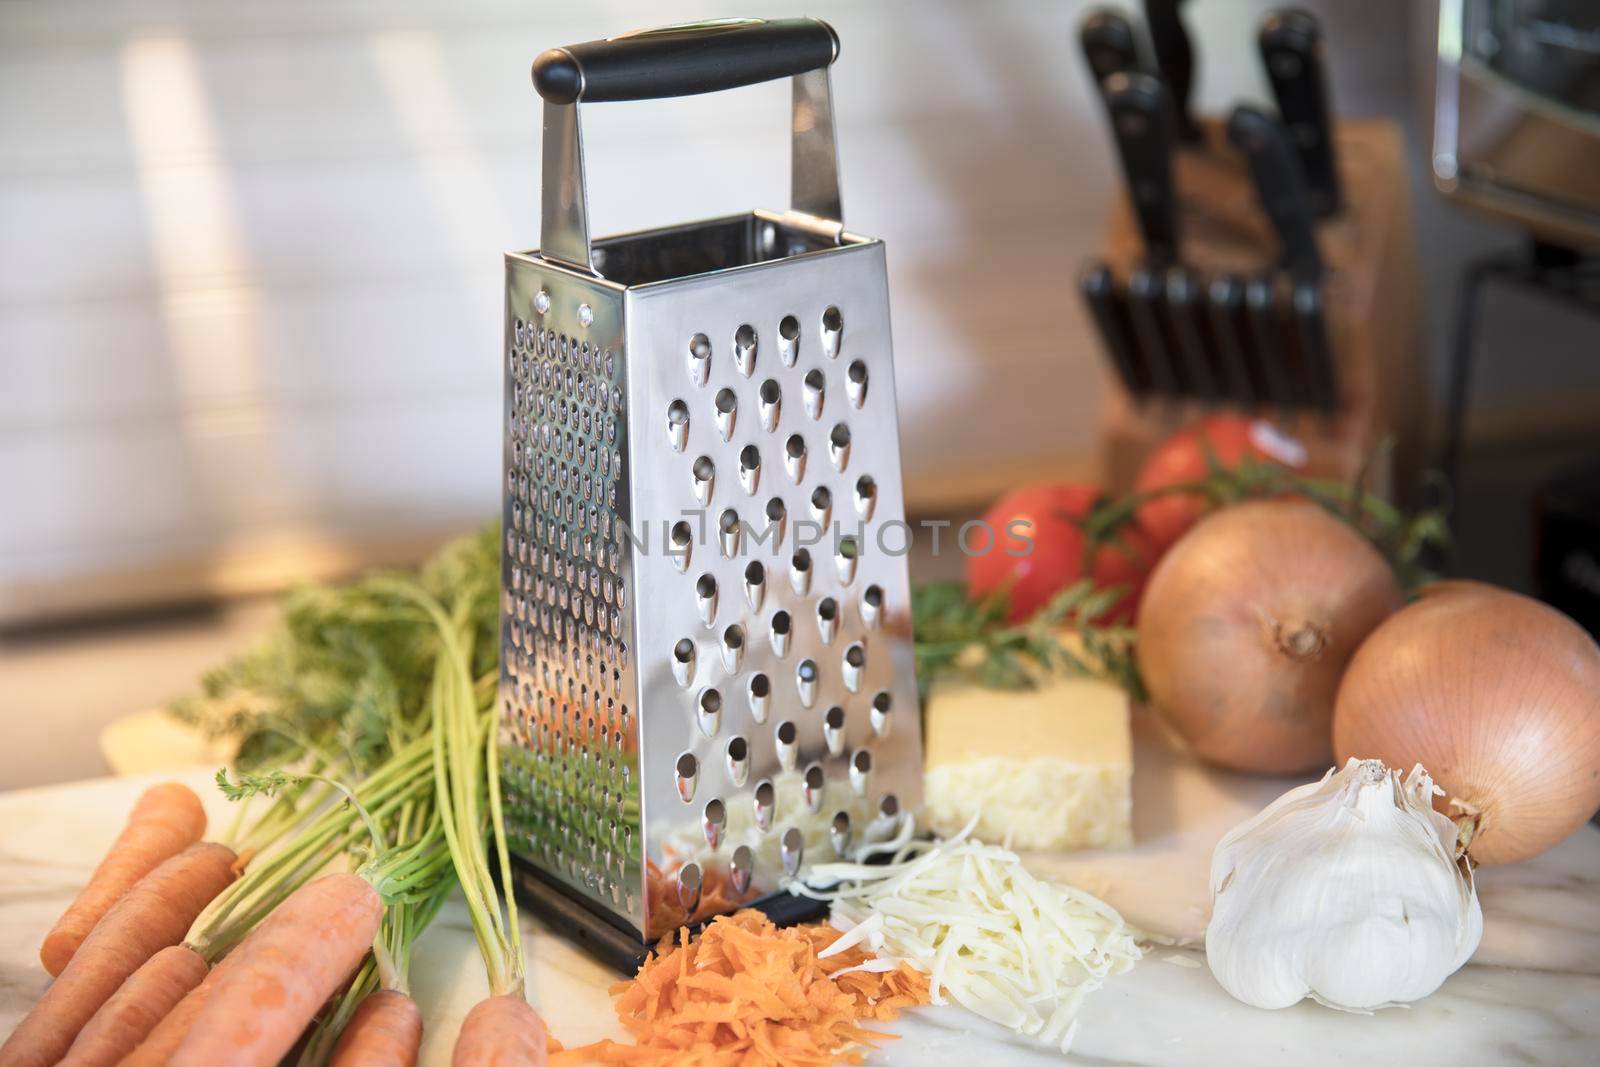 Cheese Grater and Vegetables by charlotteLake